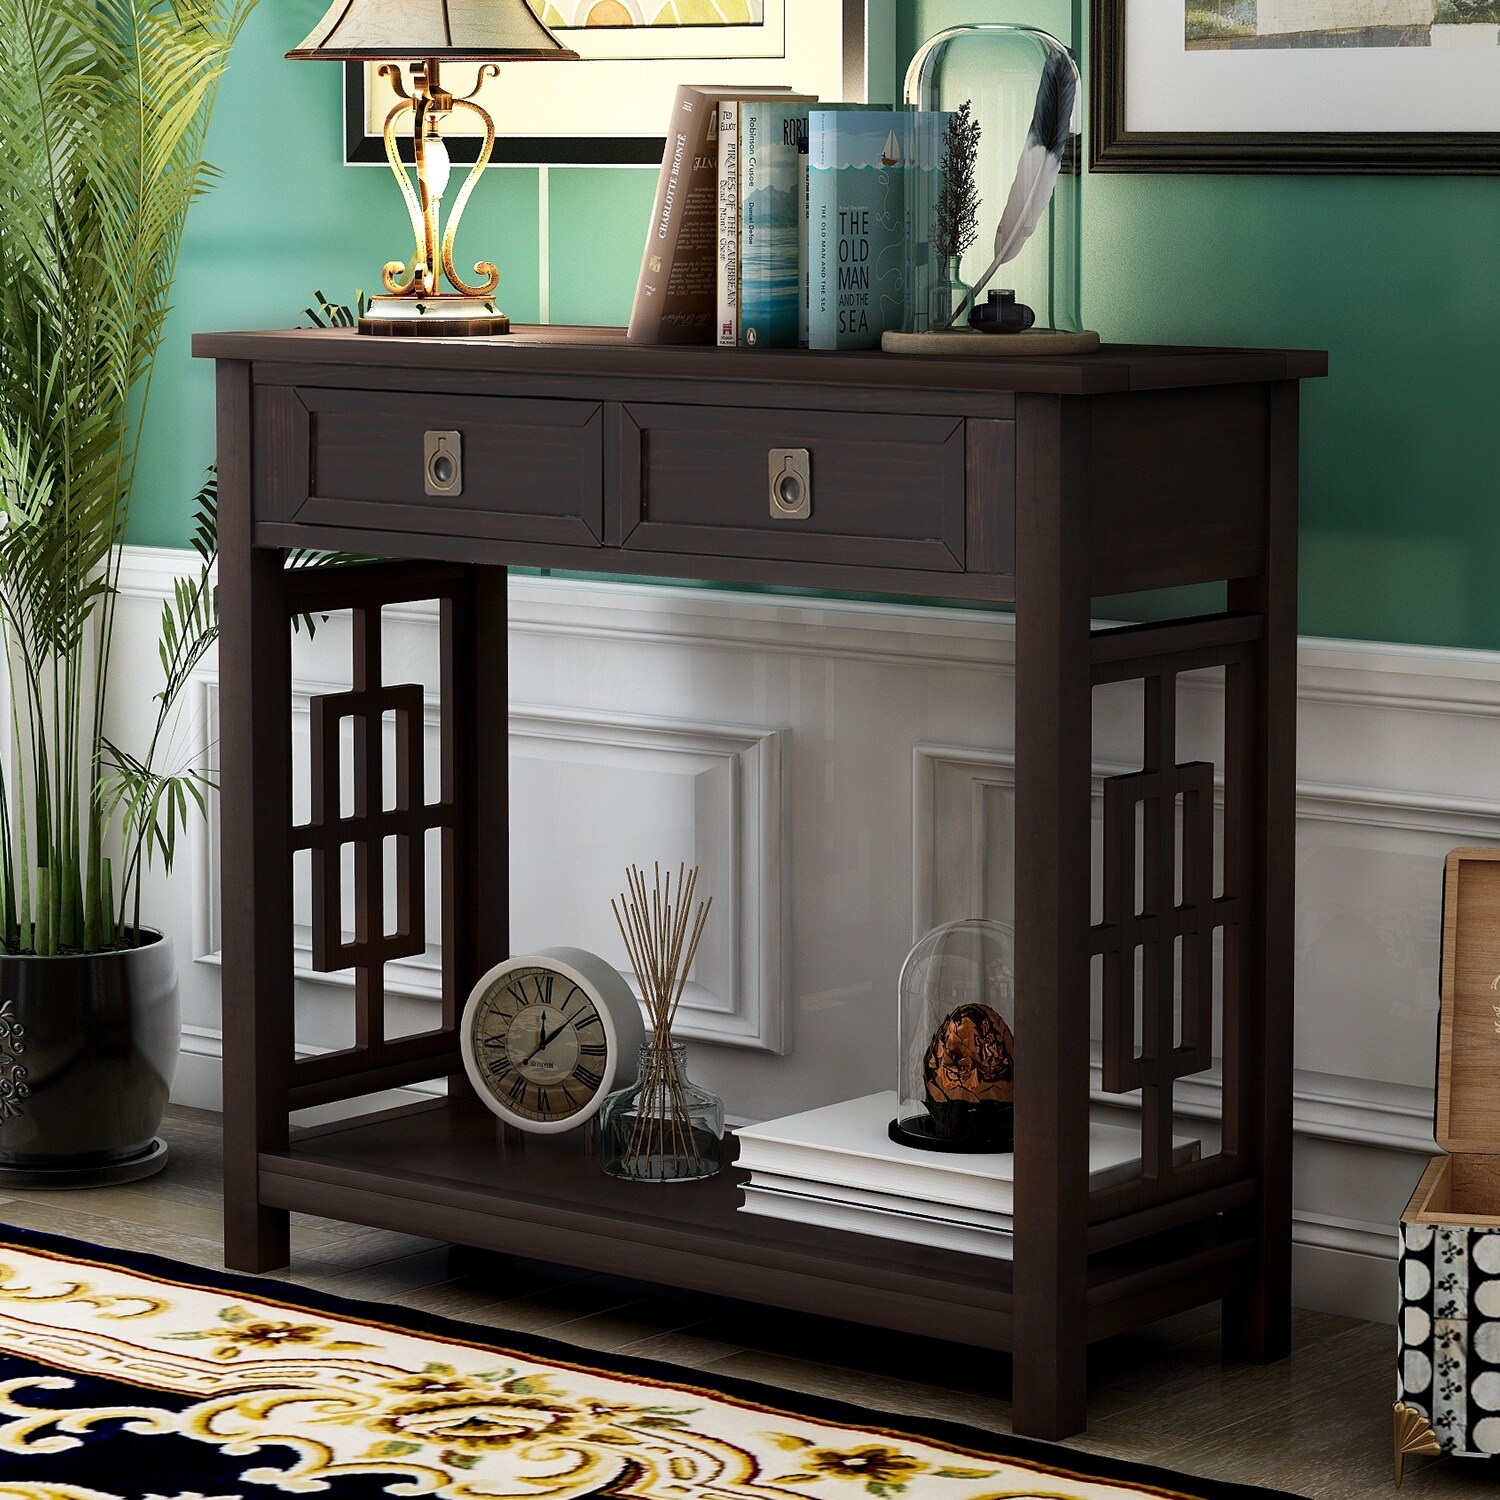 AOOLIVE Console Table with 2 DrawersandBottom Shelf, Accent Sofa Table, Espresso